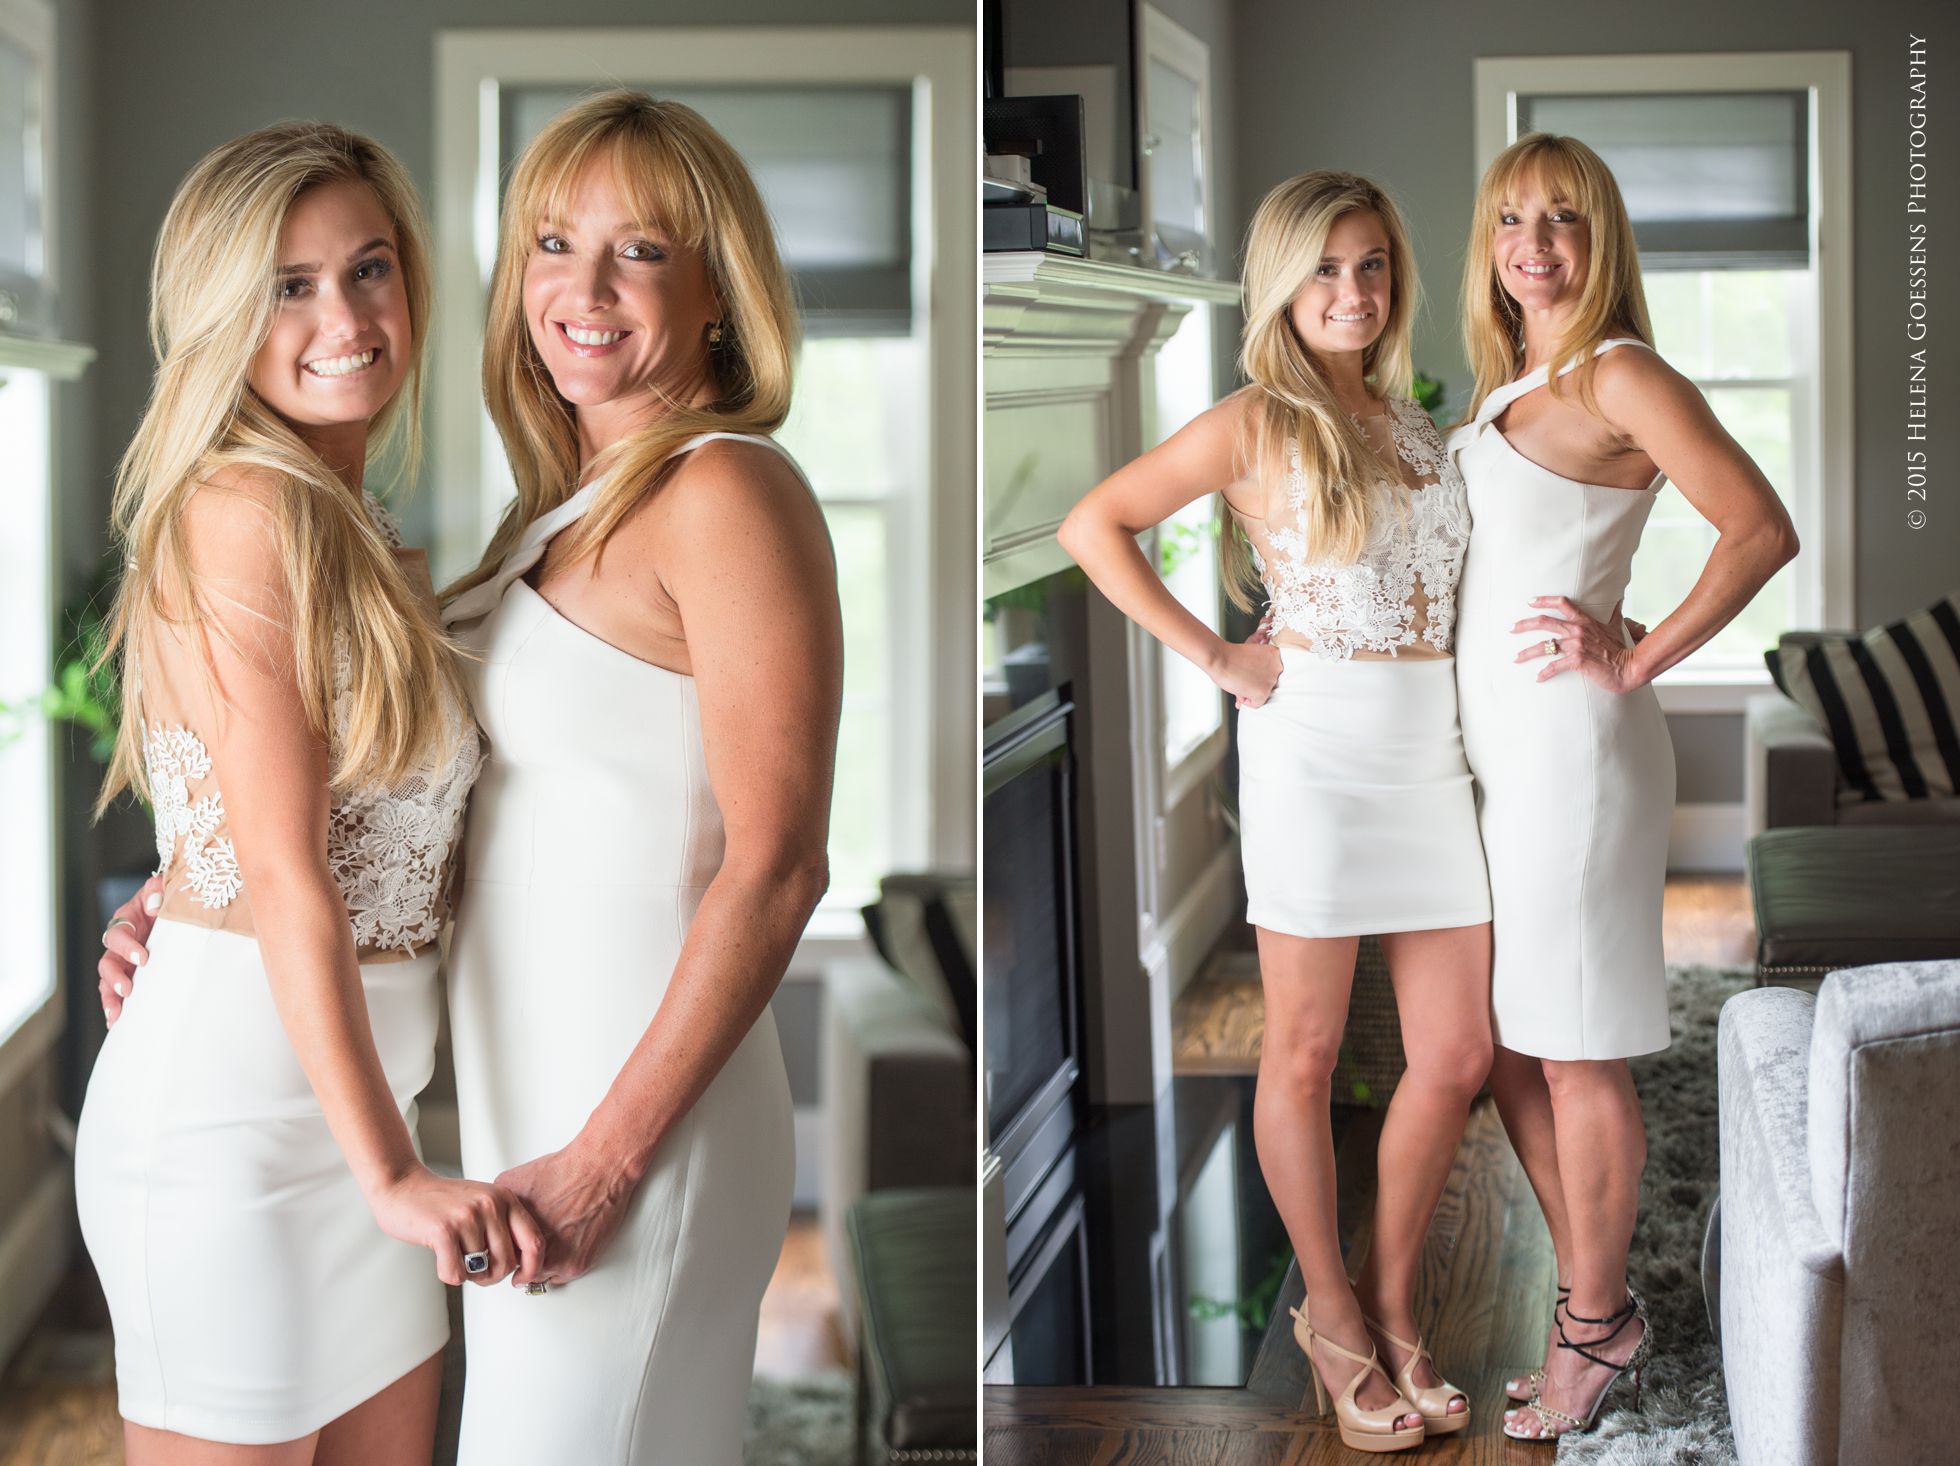 blond mom and blond daughter